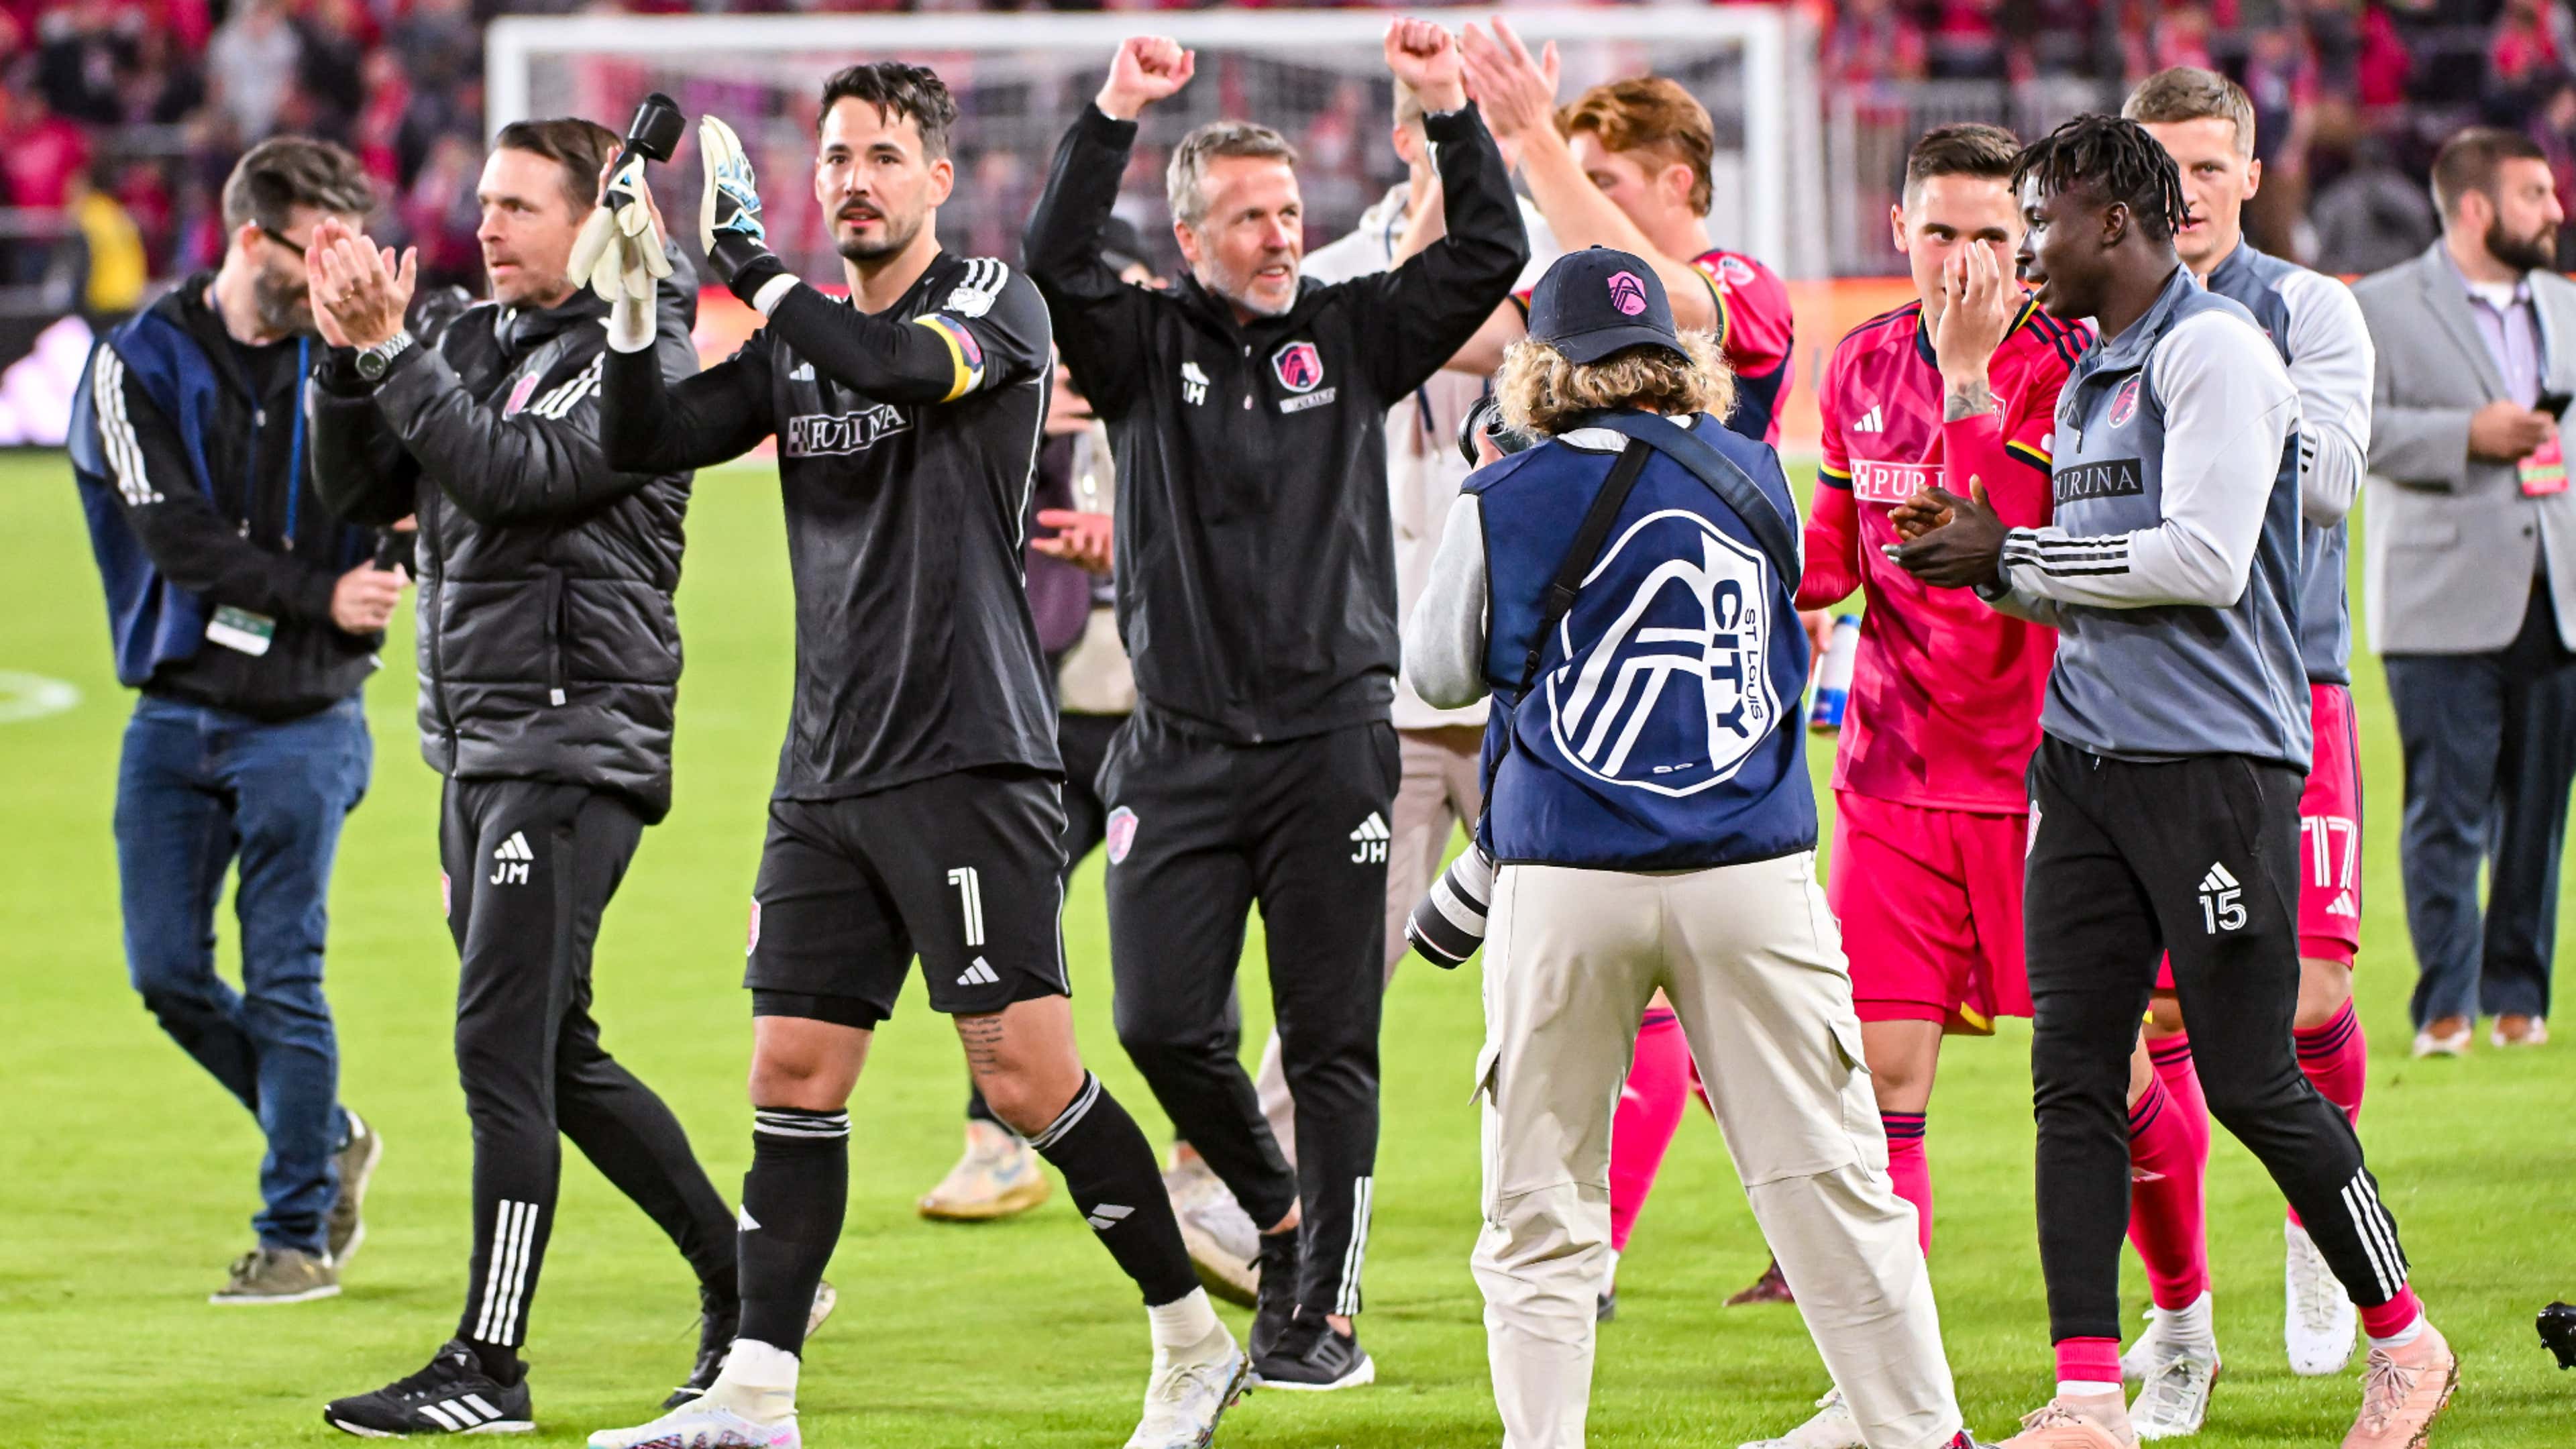 No one wanted us!' - How first-year St. Louis City SC took a group of  misfits and turned them into MLS Cup contenders